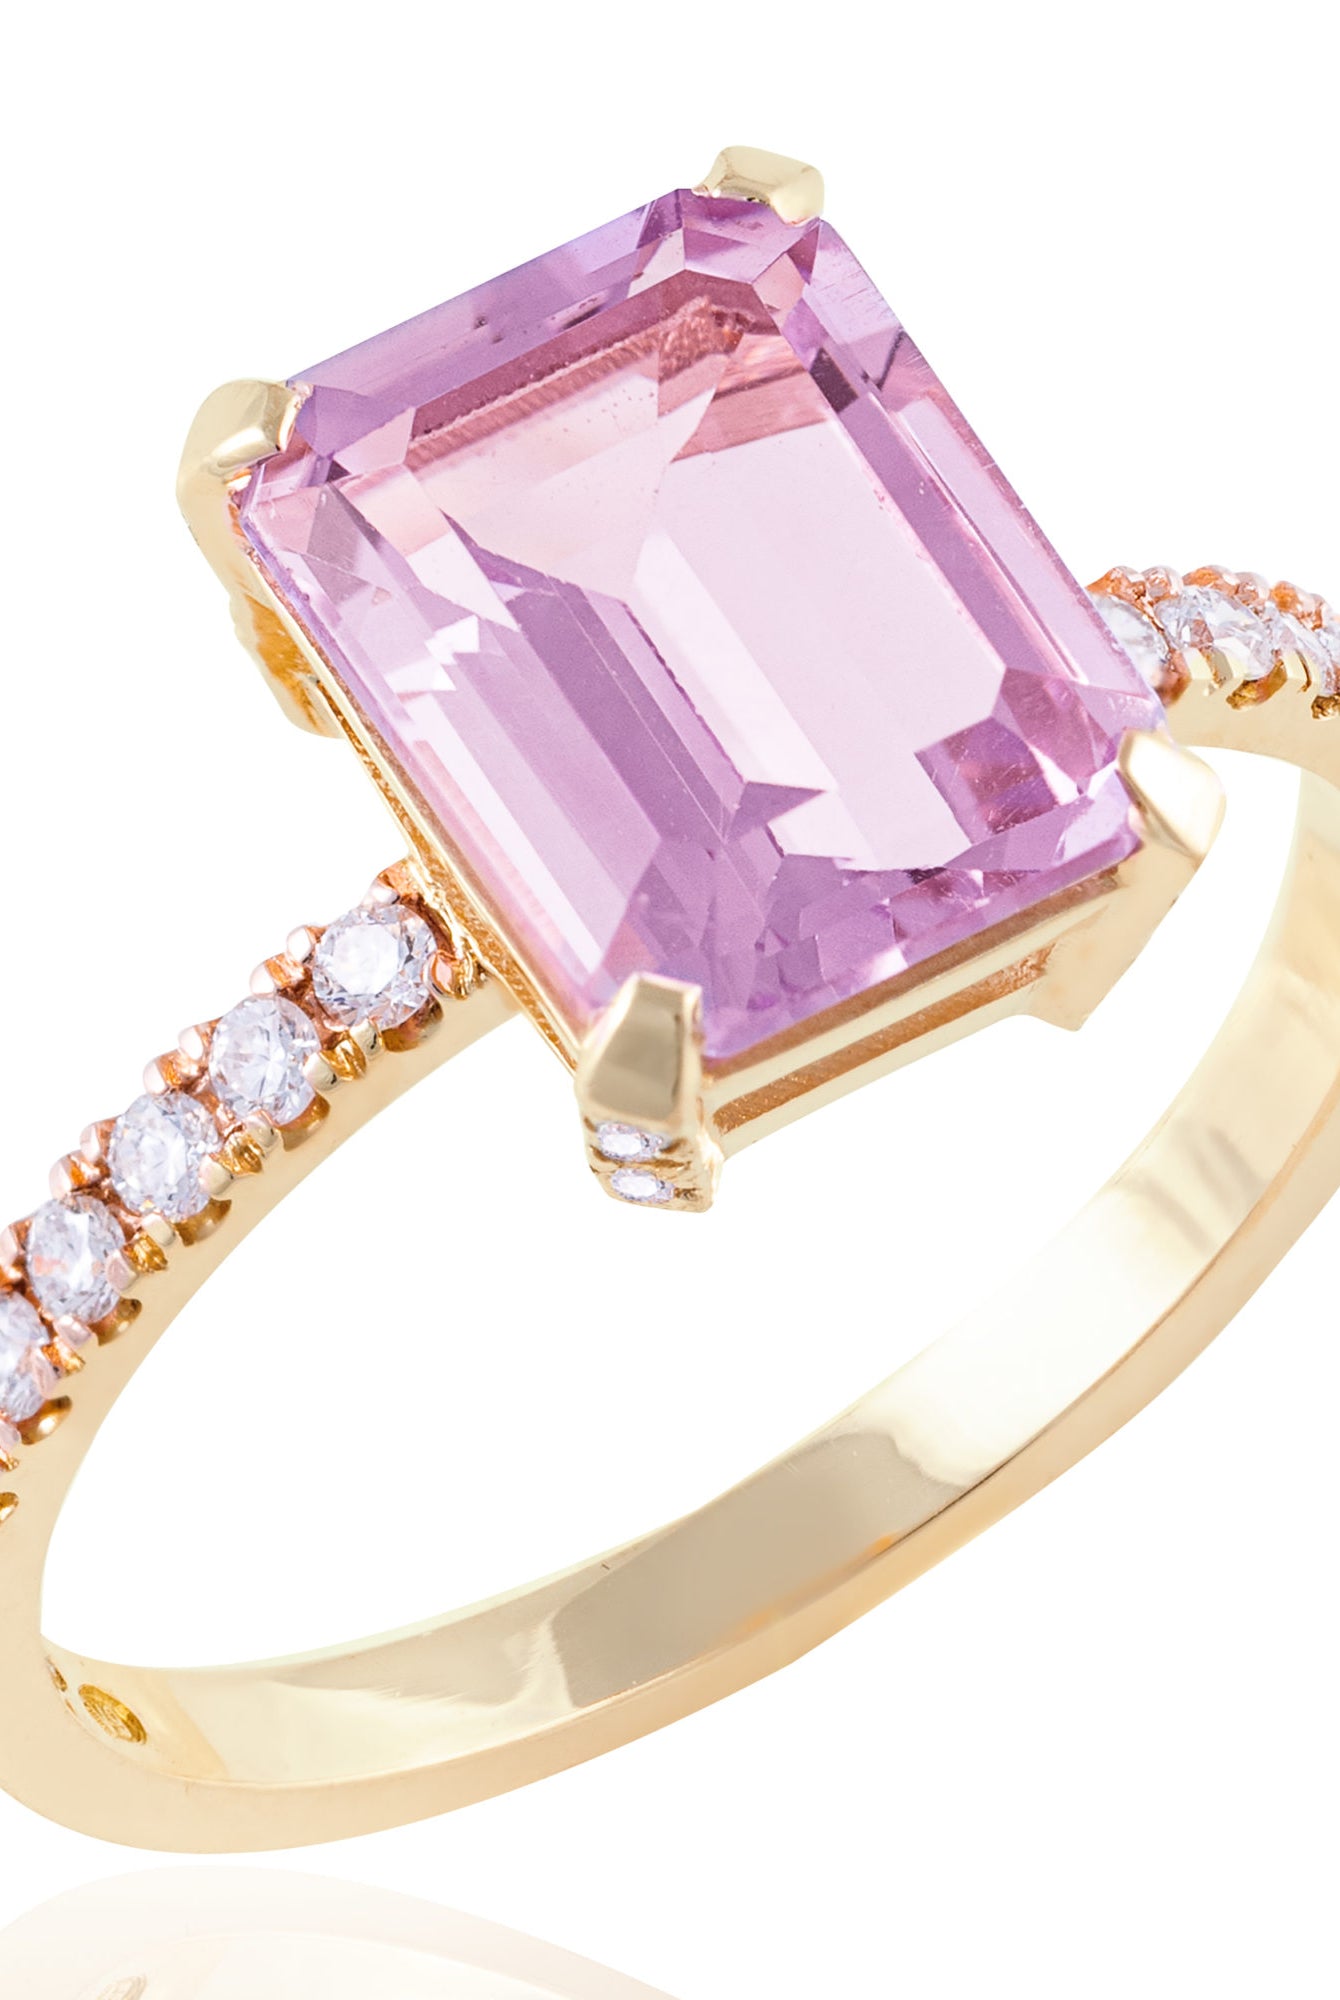 Pink amethyst and diamond ring set in 18k solid rose gold. One of a kind and handmade in Finland. 